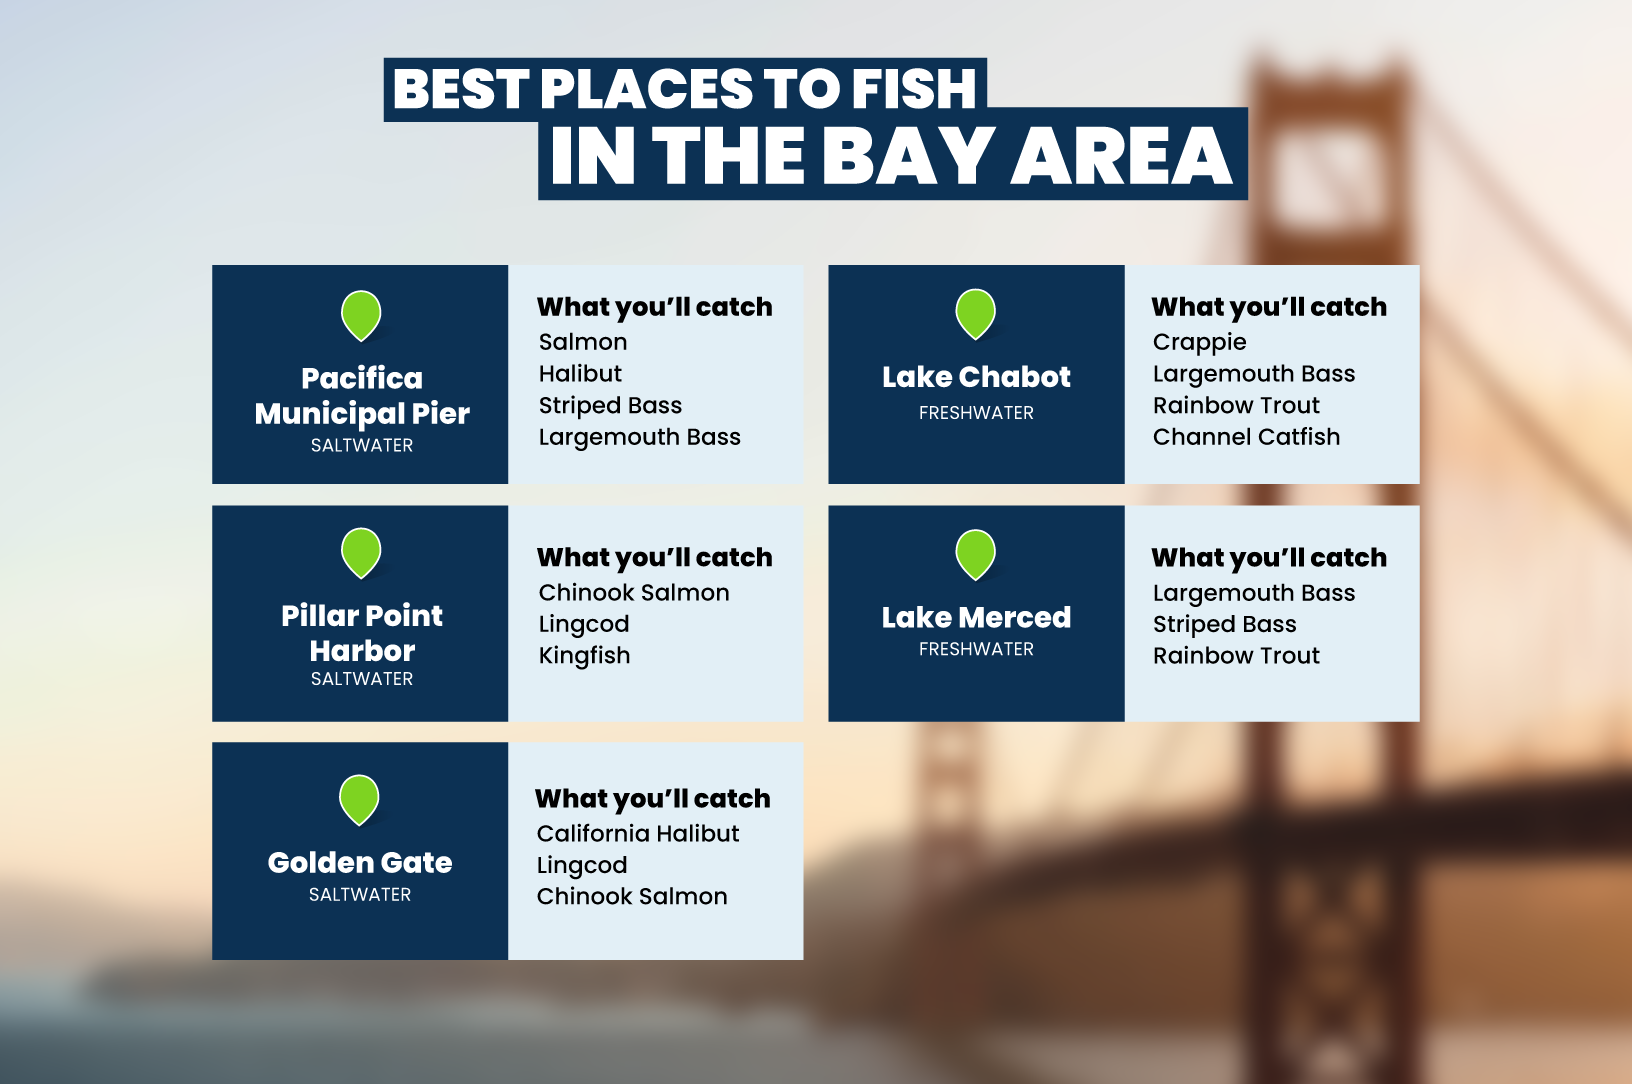 Best places to fish near San Francisco